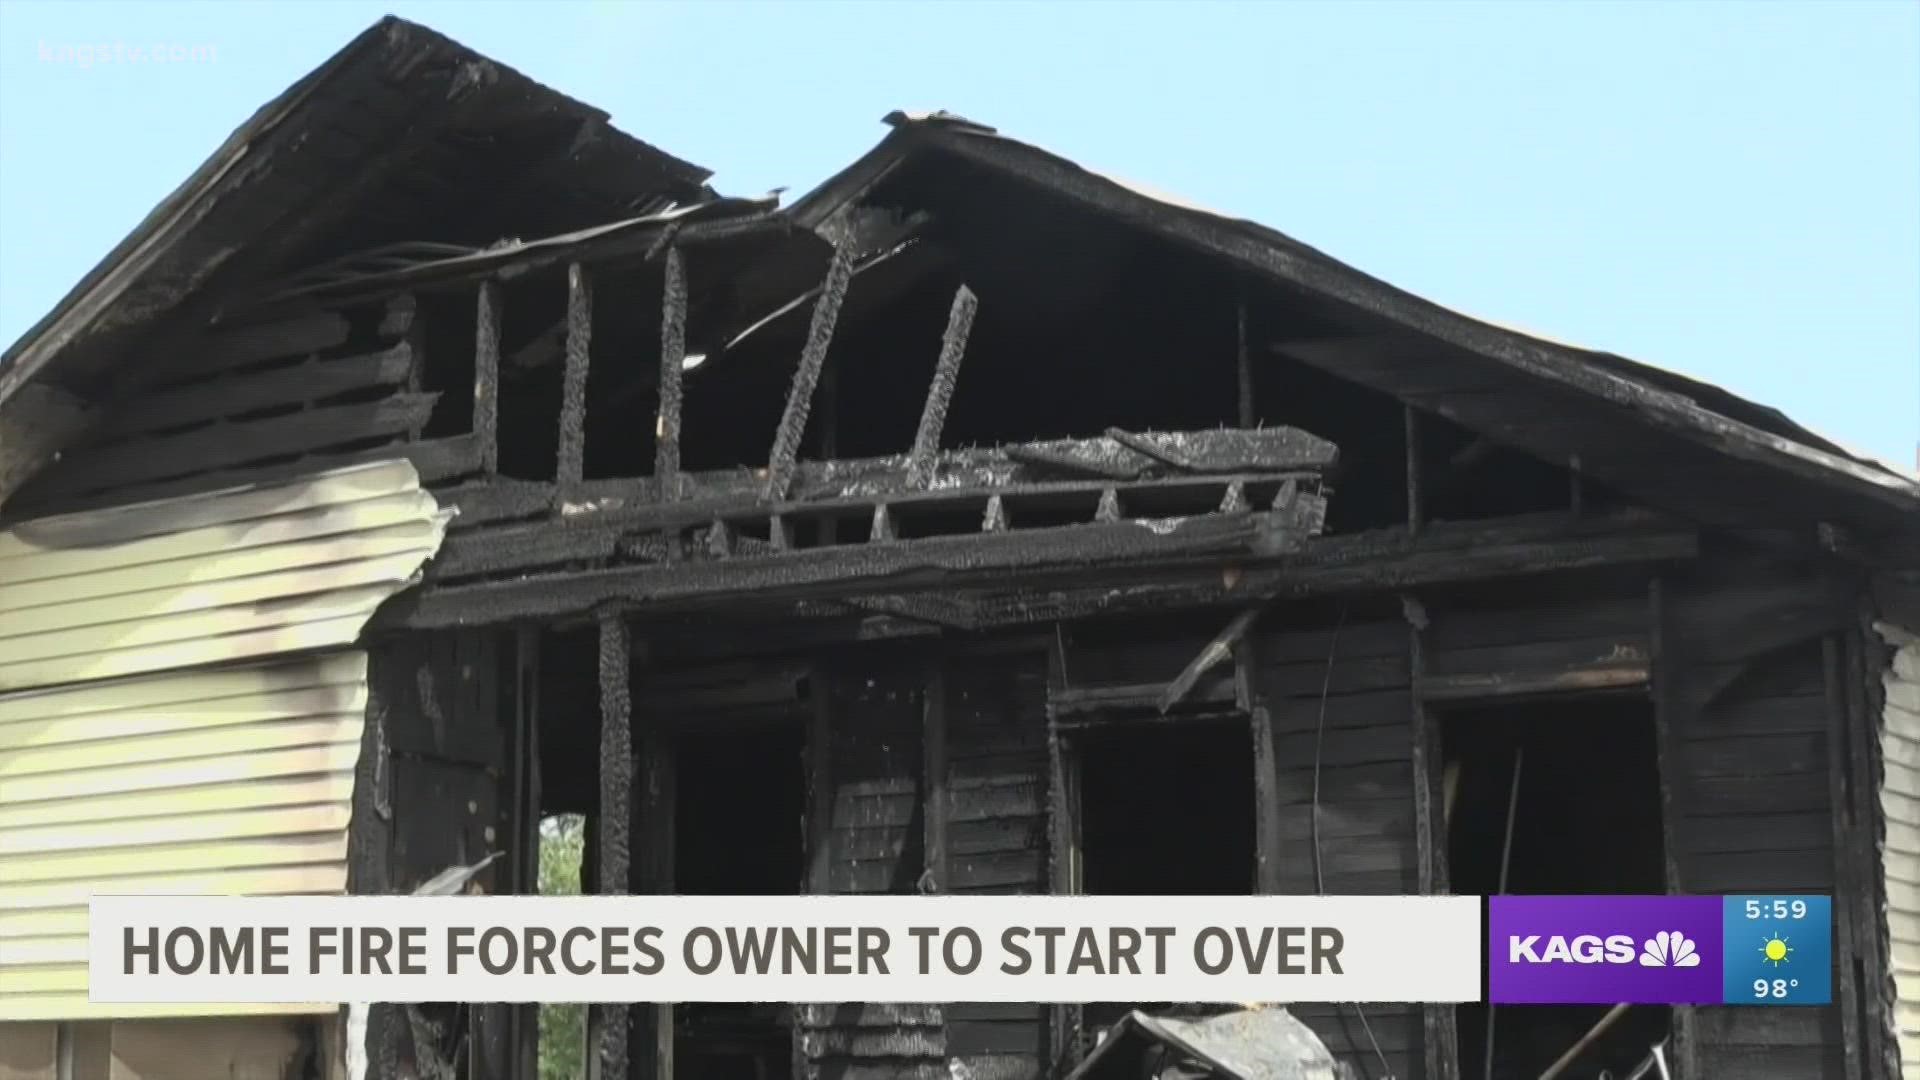 Our exclusive interview with the homeowner said her home was "her whole life."